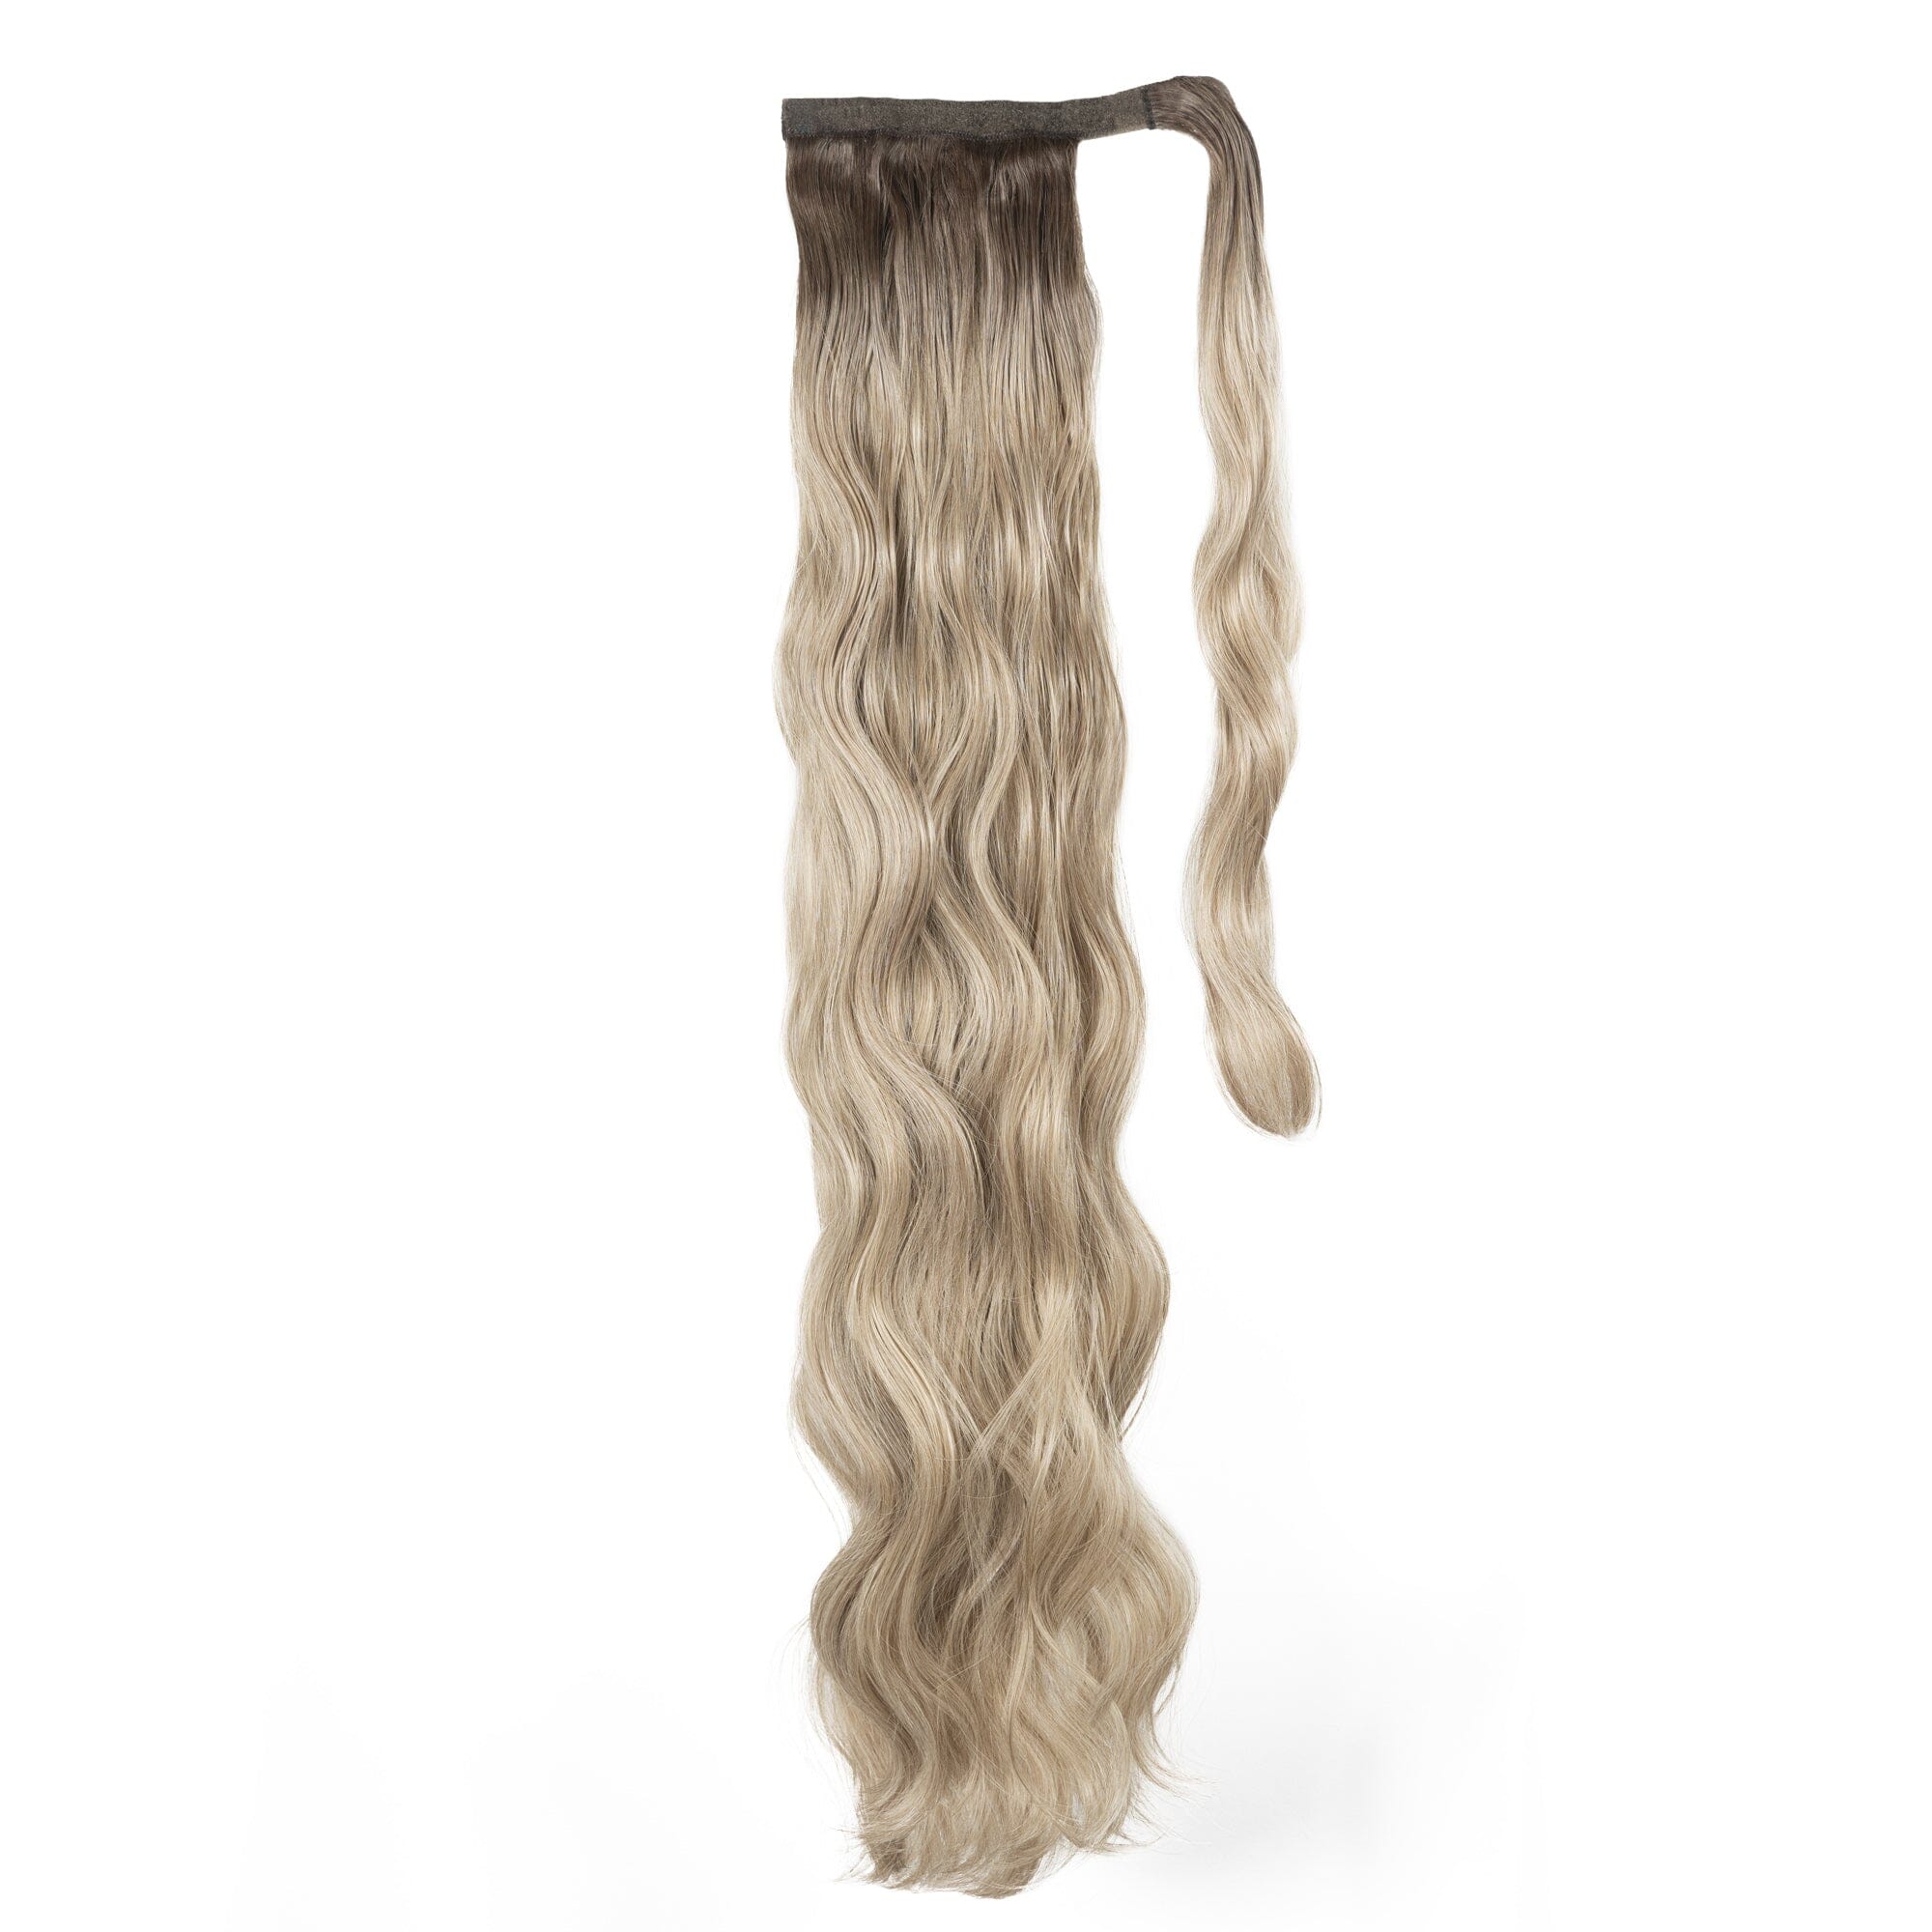 Long Clip-In Ponytails (22" - 30") Clip In Ponytail Easilocks 30"Body Wave Clip-In Ponytail Cool Blonde 